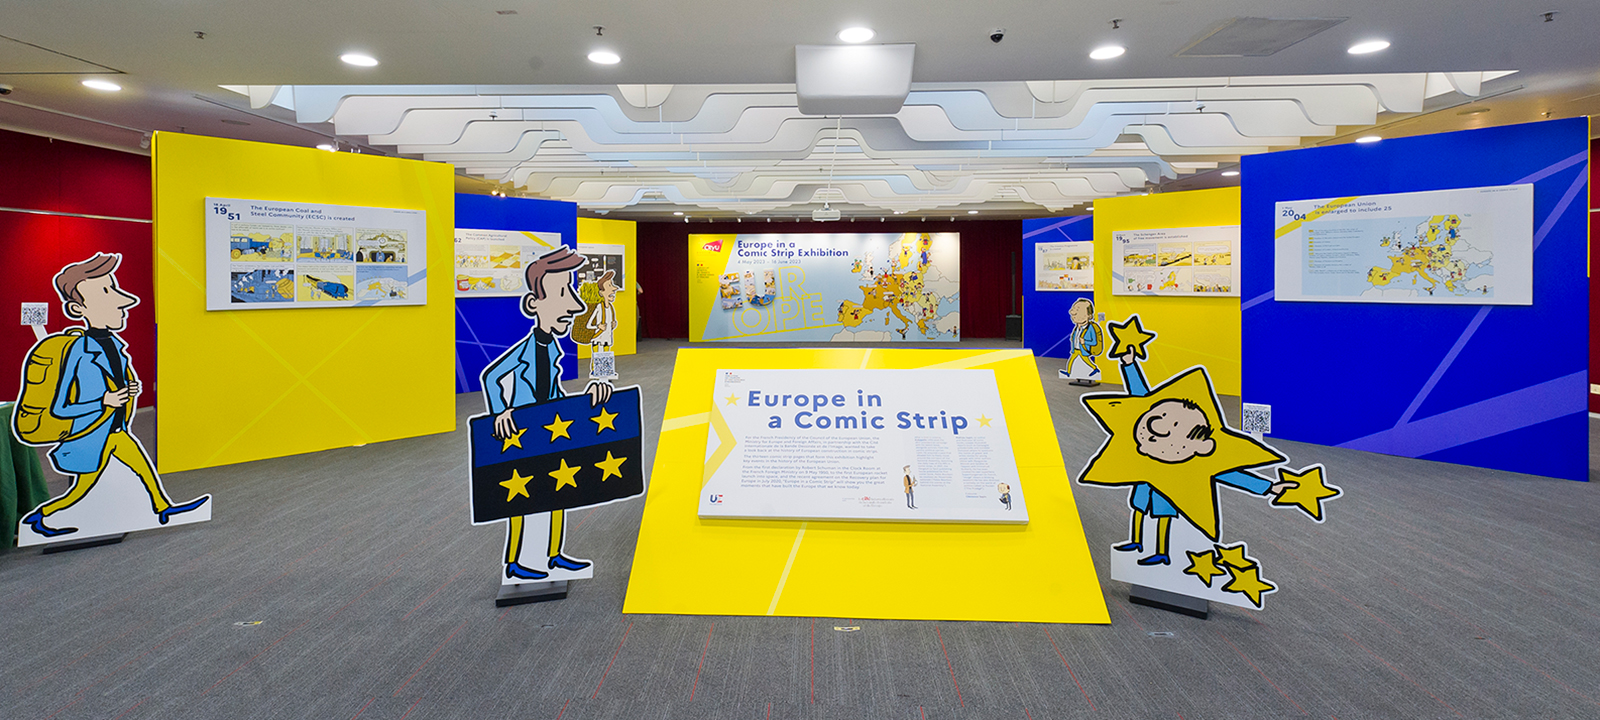 The “Europe in a Comic Strip” exhibition